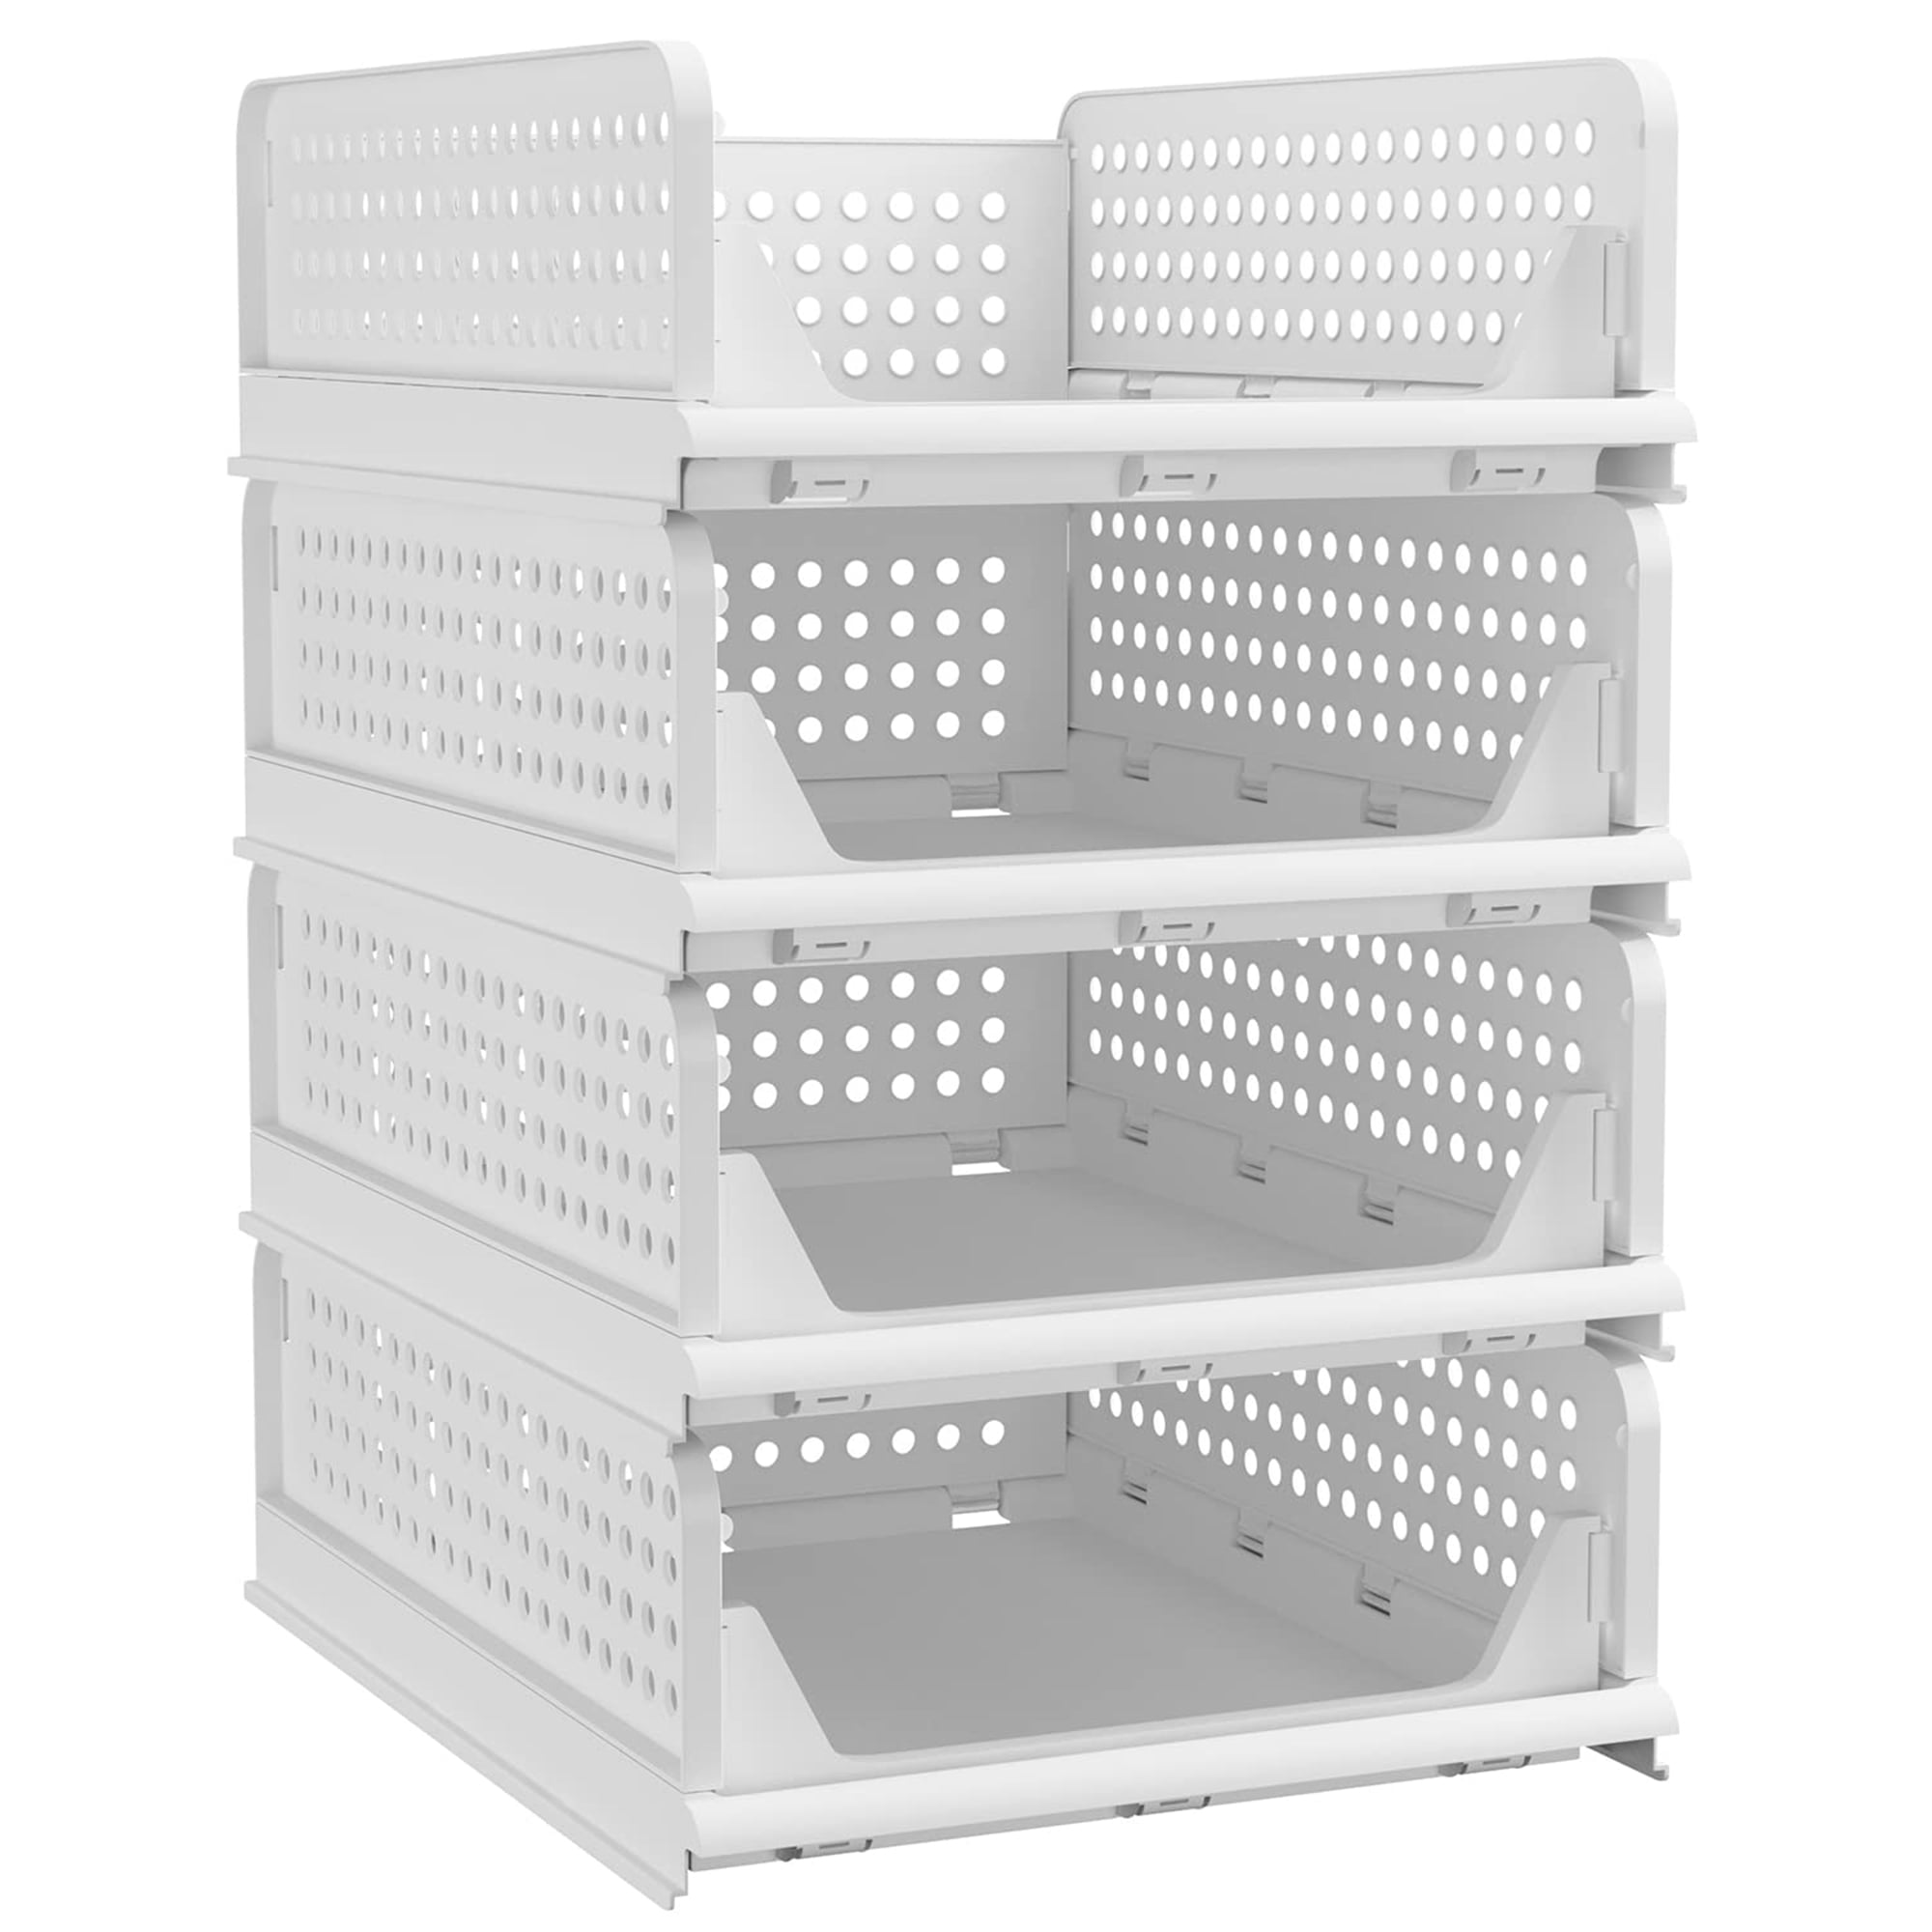 Phyllia 4 Pack Closet Basket Shelf Storage Bins Plastic Super Large Capacity Collapsible Kid Toy Rack White for Kitchen Cabinets Pantry Offices Bedrooms